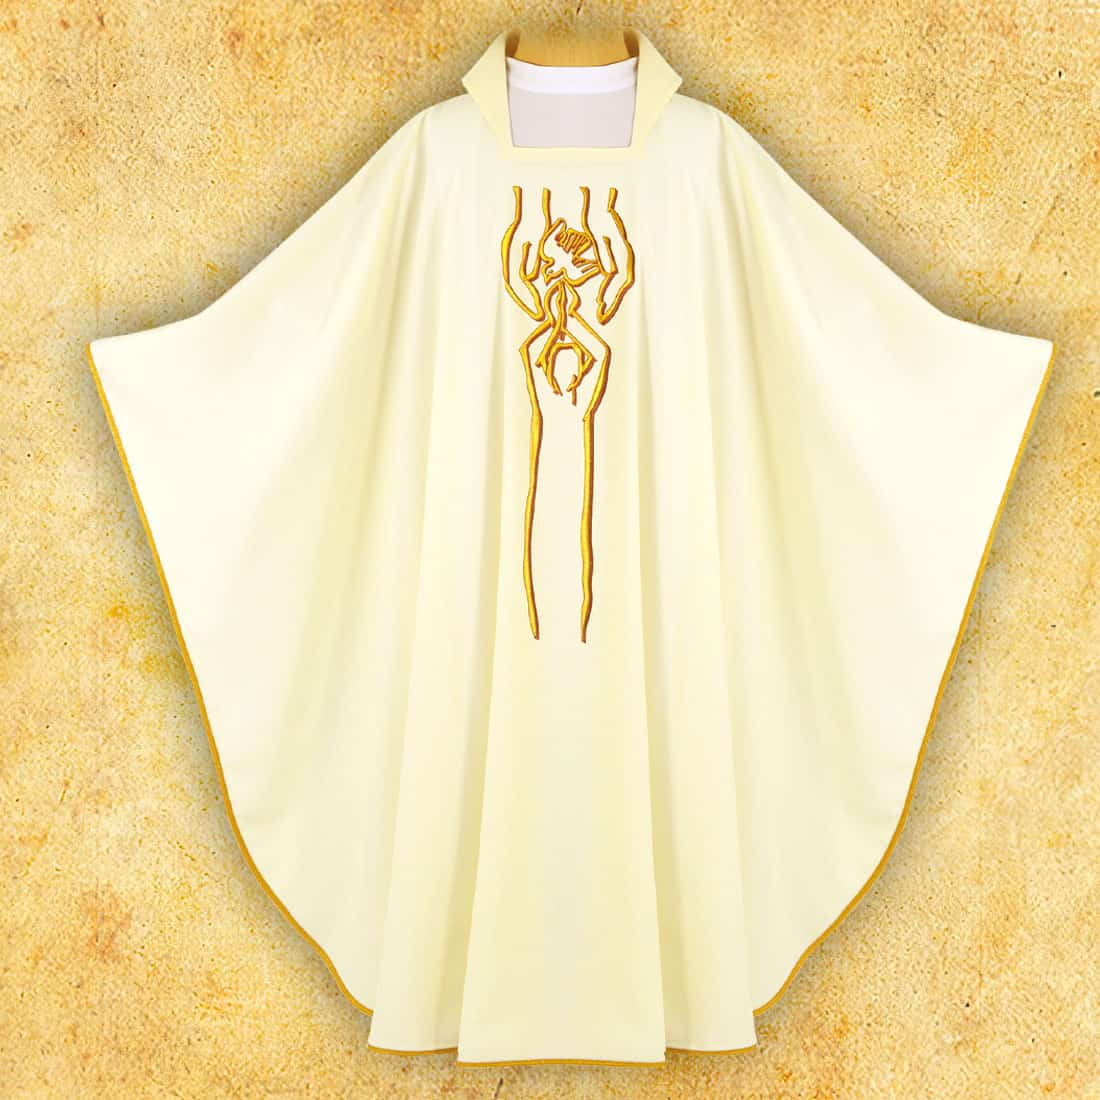 "Oasis" embroidered chasuble